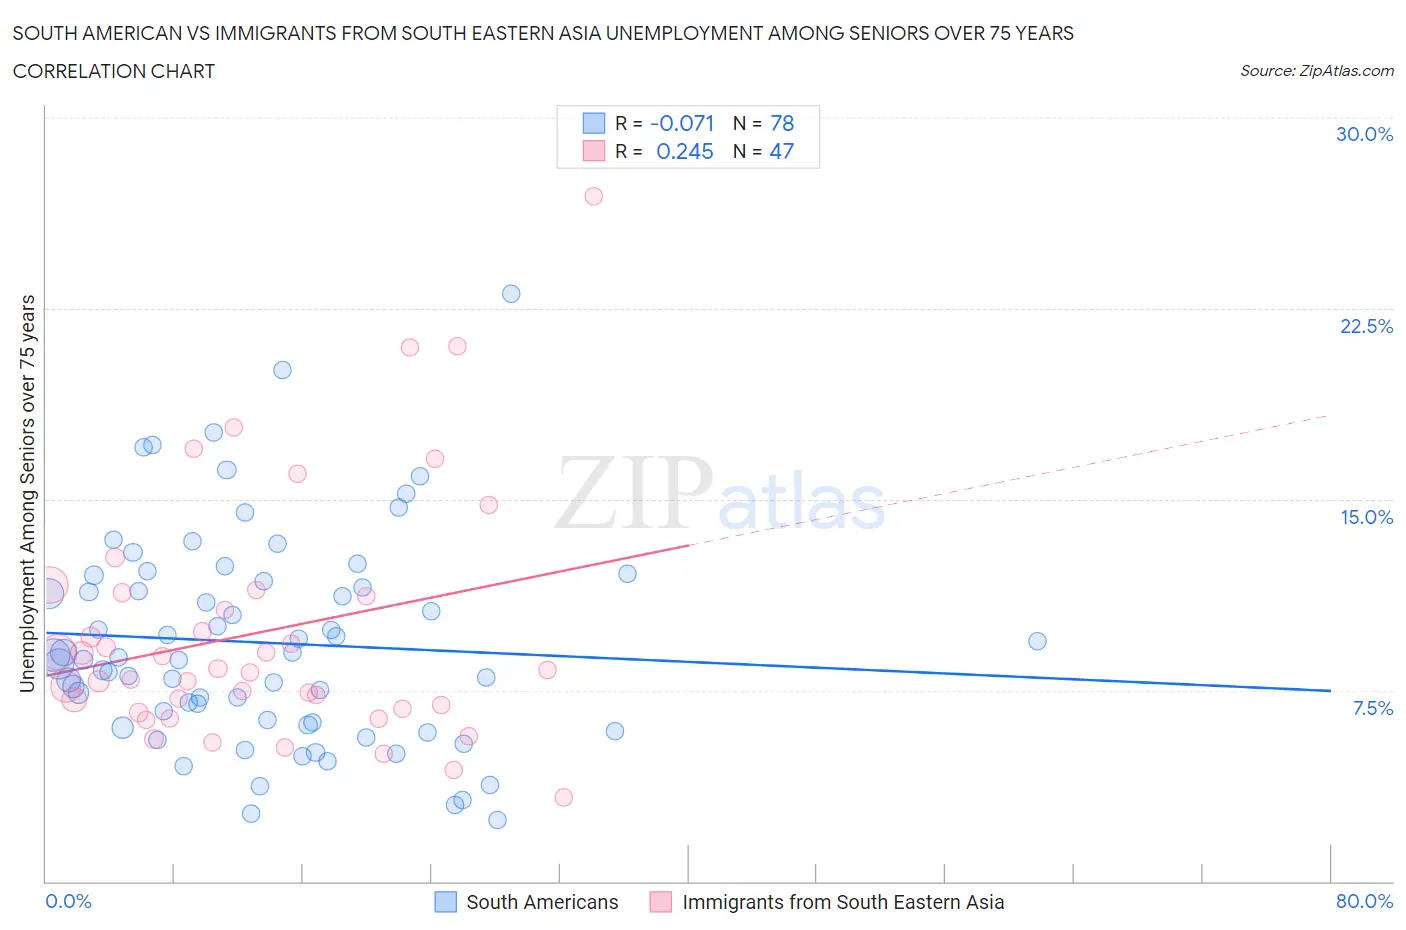 South American vs Immigrants from South Eastern Asia Unemployment Among Seniors over 75 years